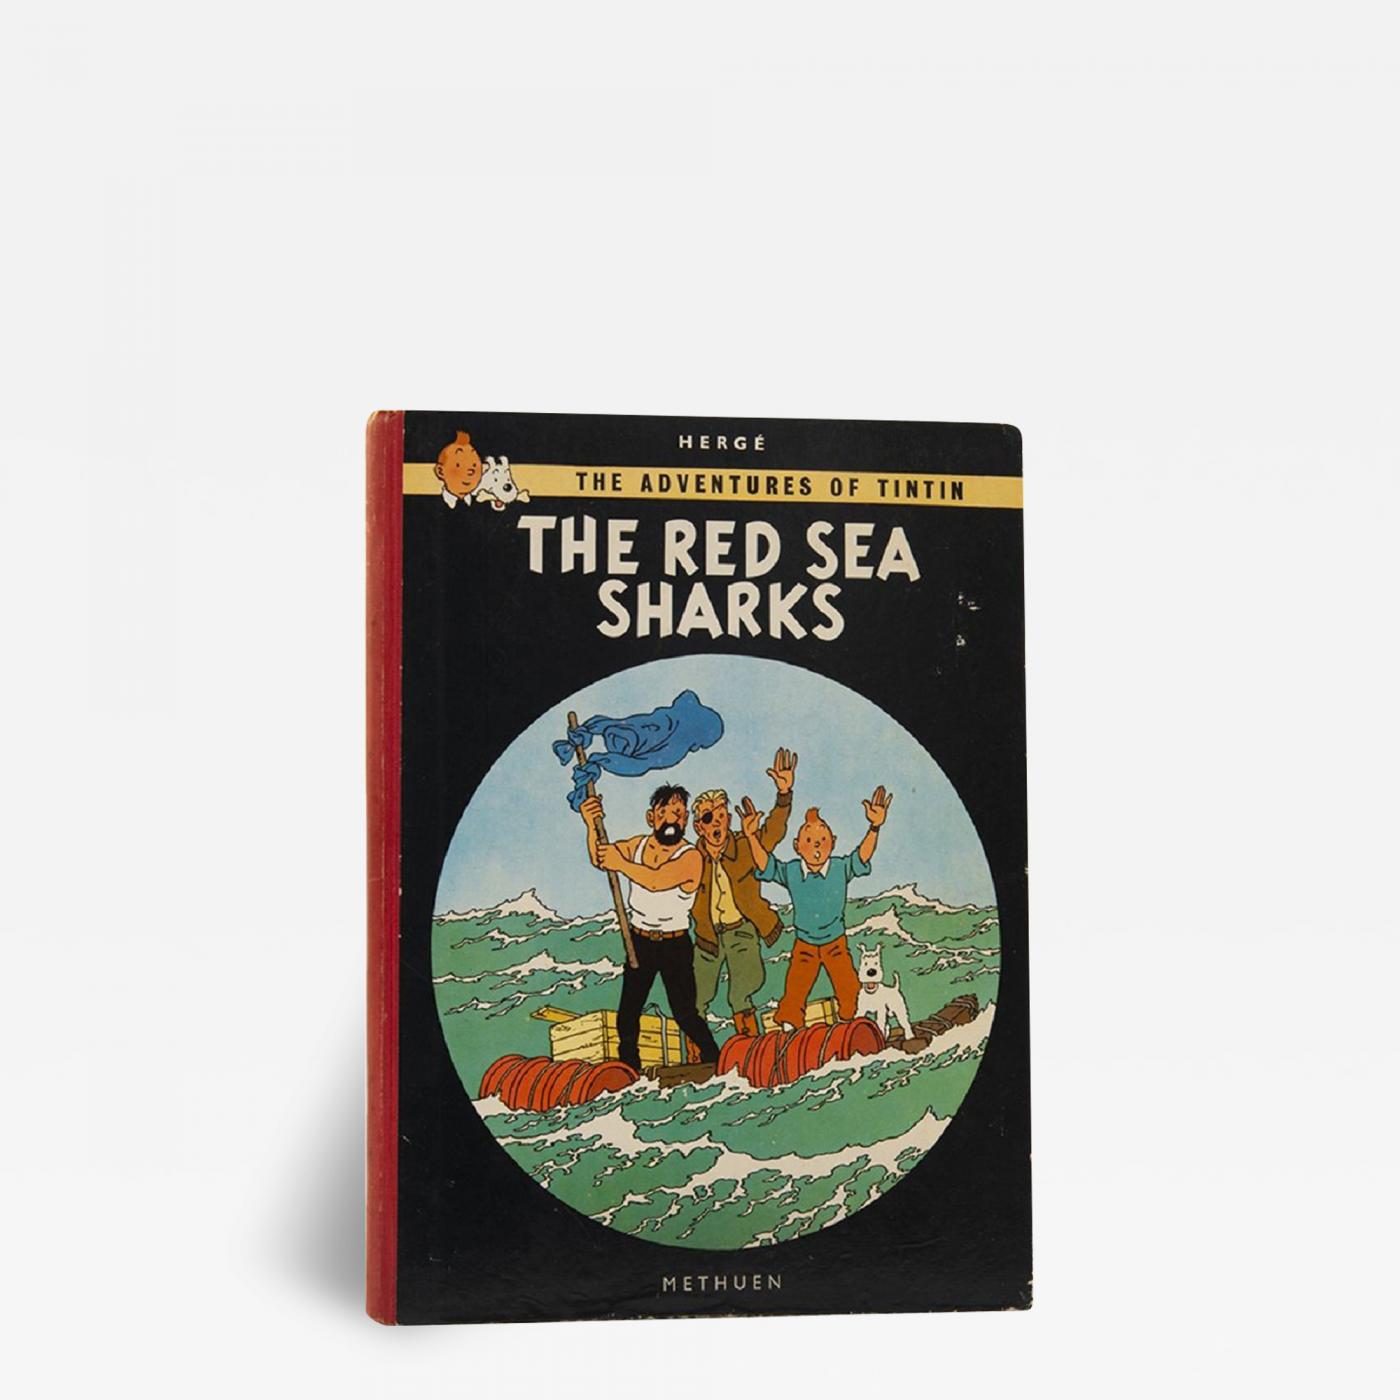 HERGÉ - The of Tintin: Red Sea Sharks. by HERGÉ